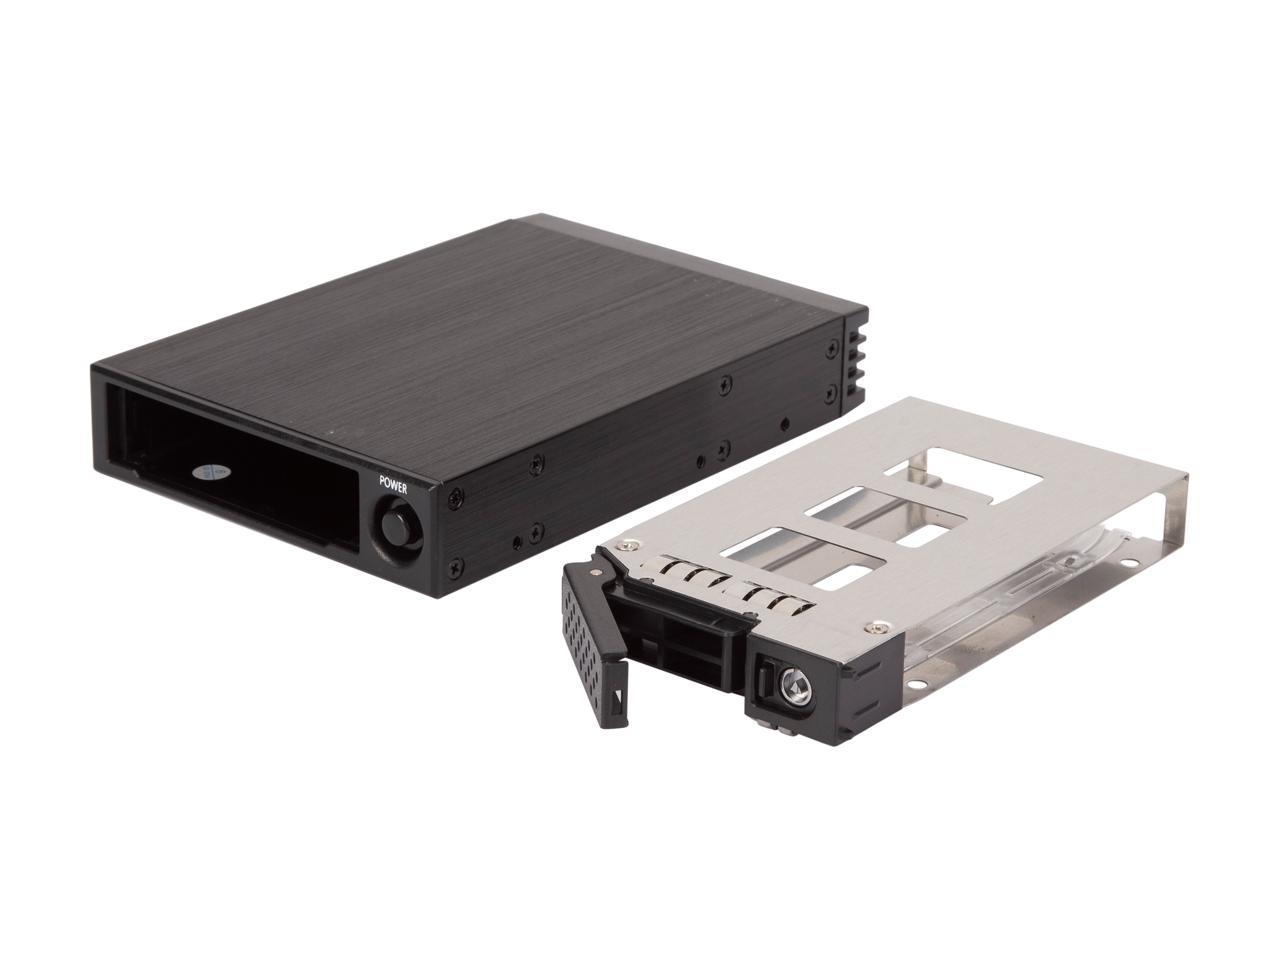 Athena Power BP-SAC3121AB 1 x 3.5" Bay for 2.5" SSD/HDD with Tray Design Key Lock, Aluminum Frame with Stainless Tray